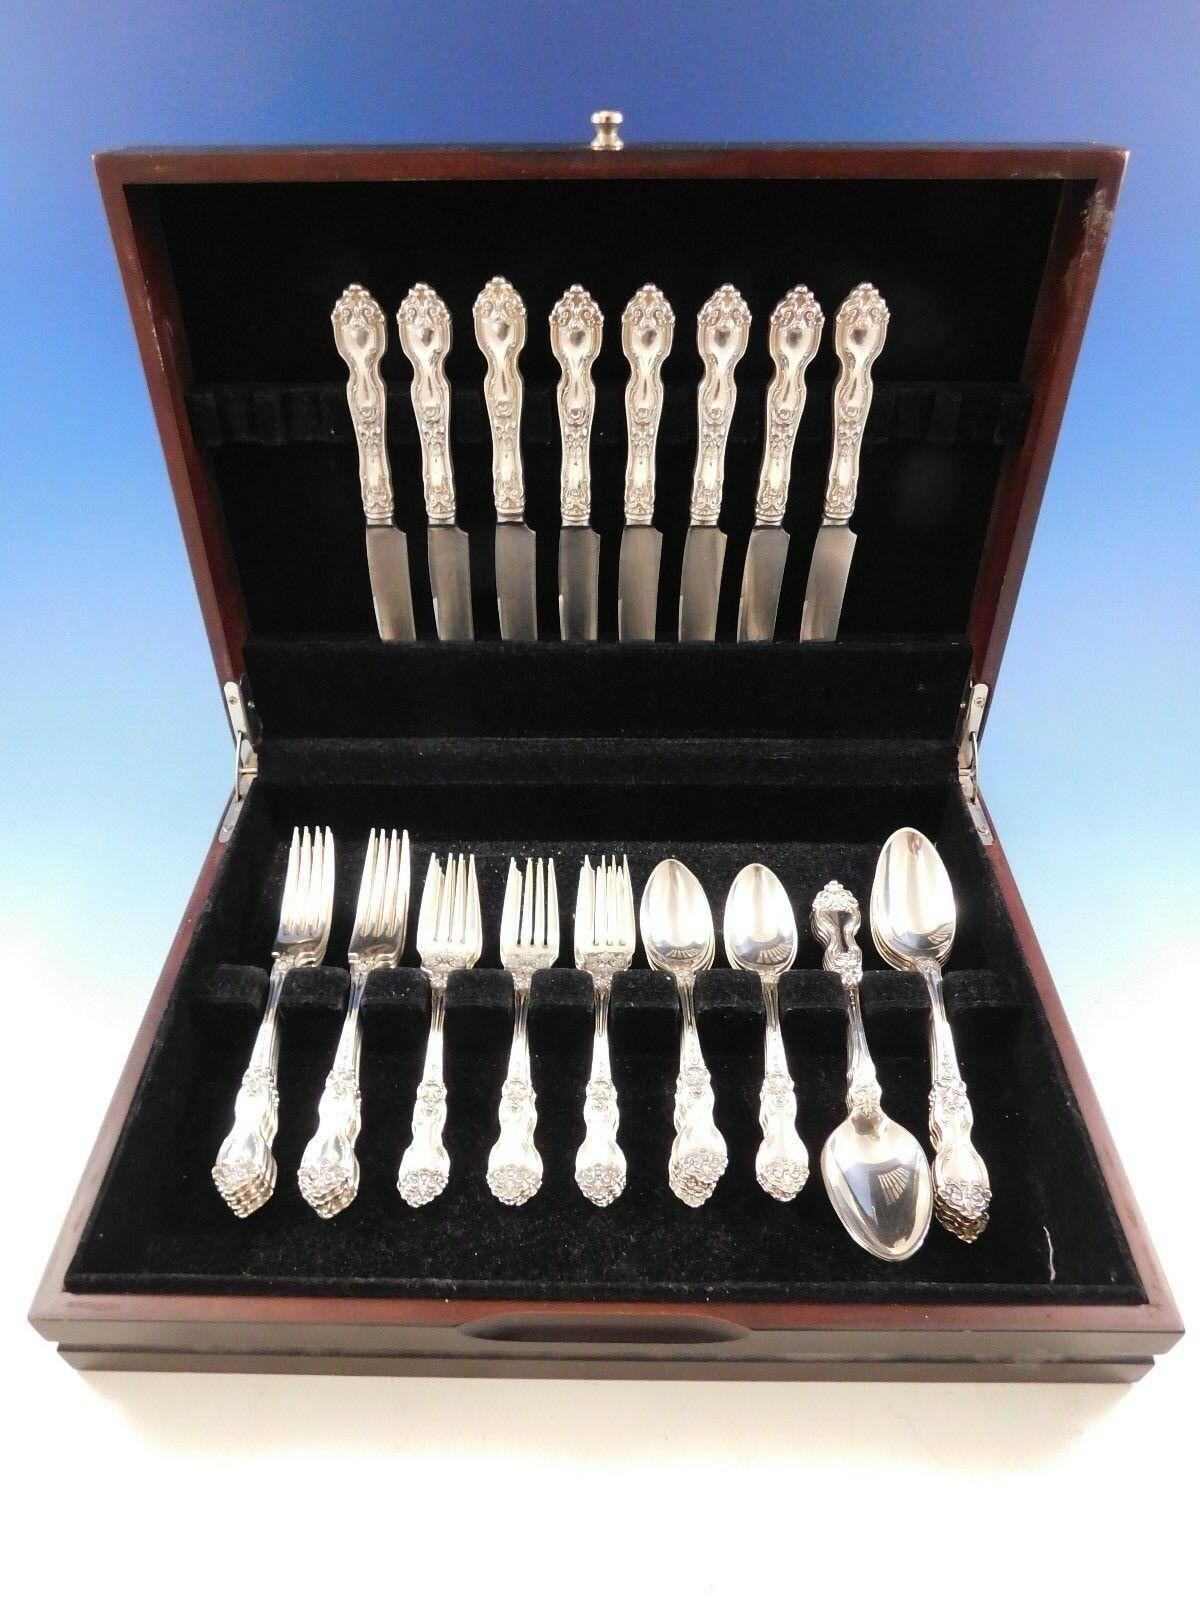 Beautiful La Reine by Wallace sterling silver flatware set, 40 pieces. This set includes:

8 knives, 8 3/4